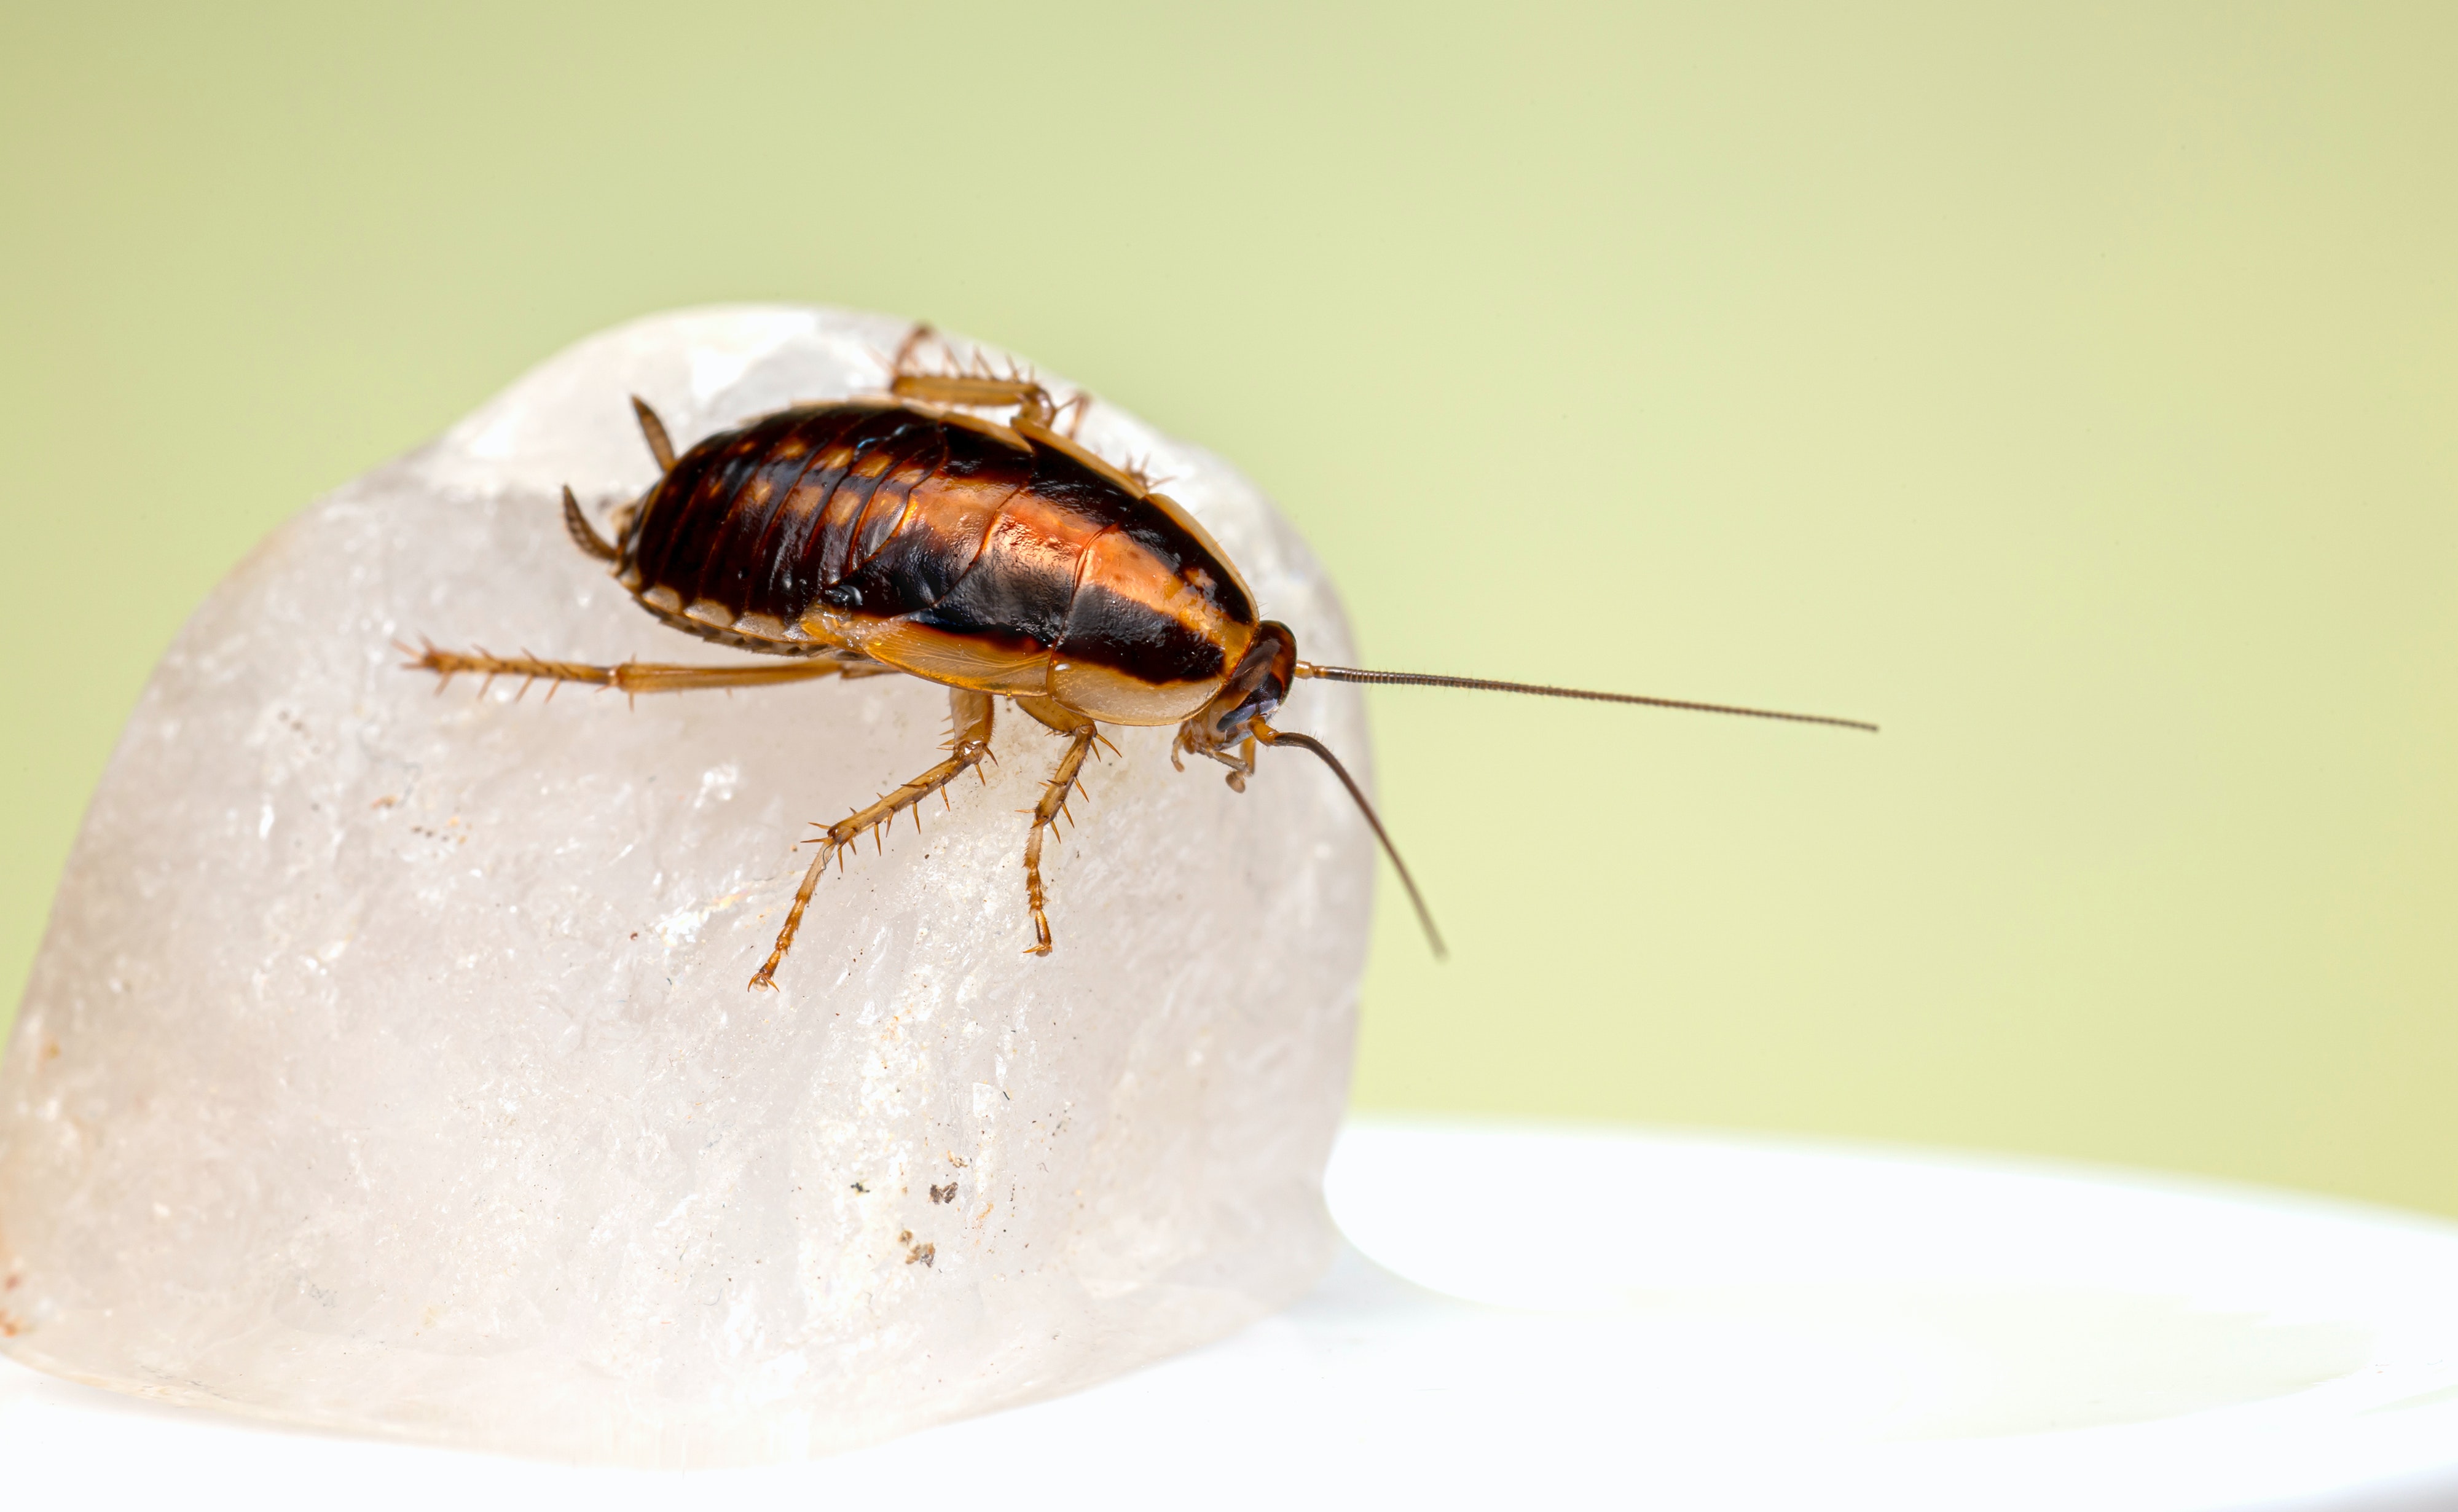 How to get rid of cockroaches home remedies